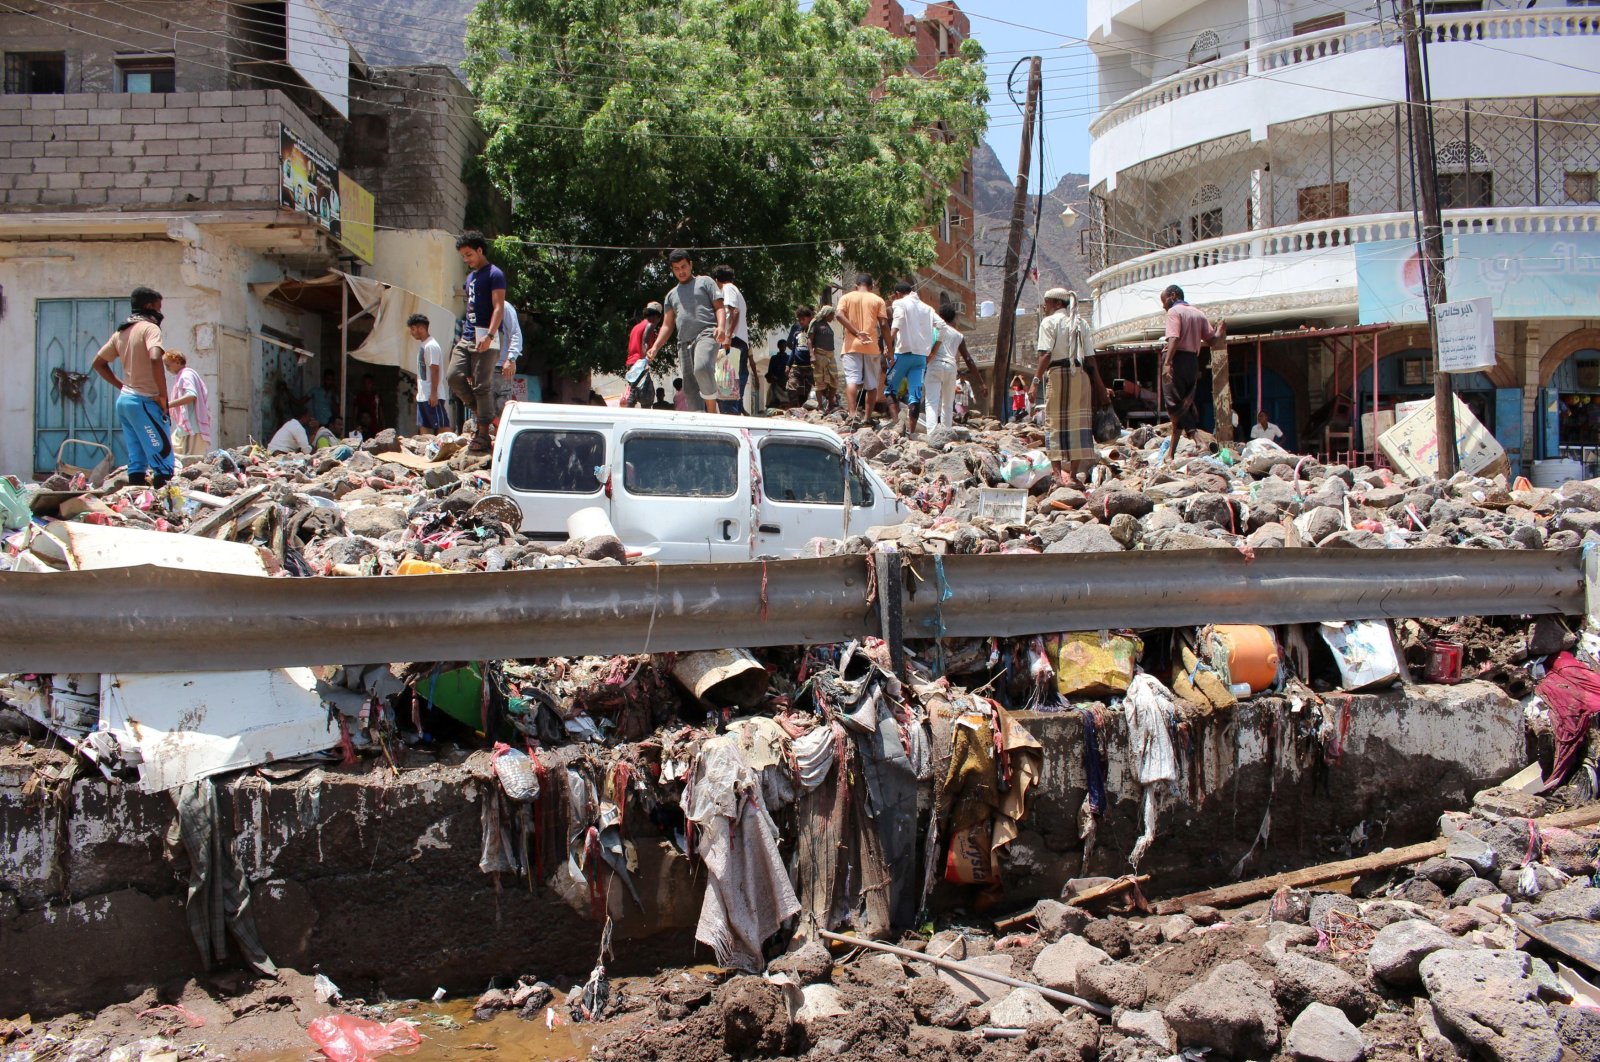 People inspect damage caused by floods on a street in Aden, Yemen, April 22, 2020. (Reuters Photo)